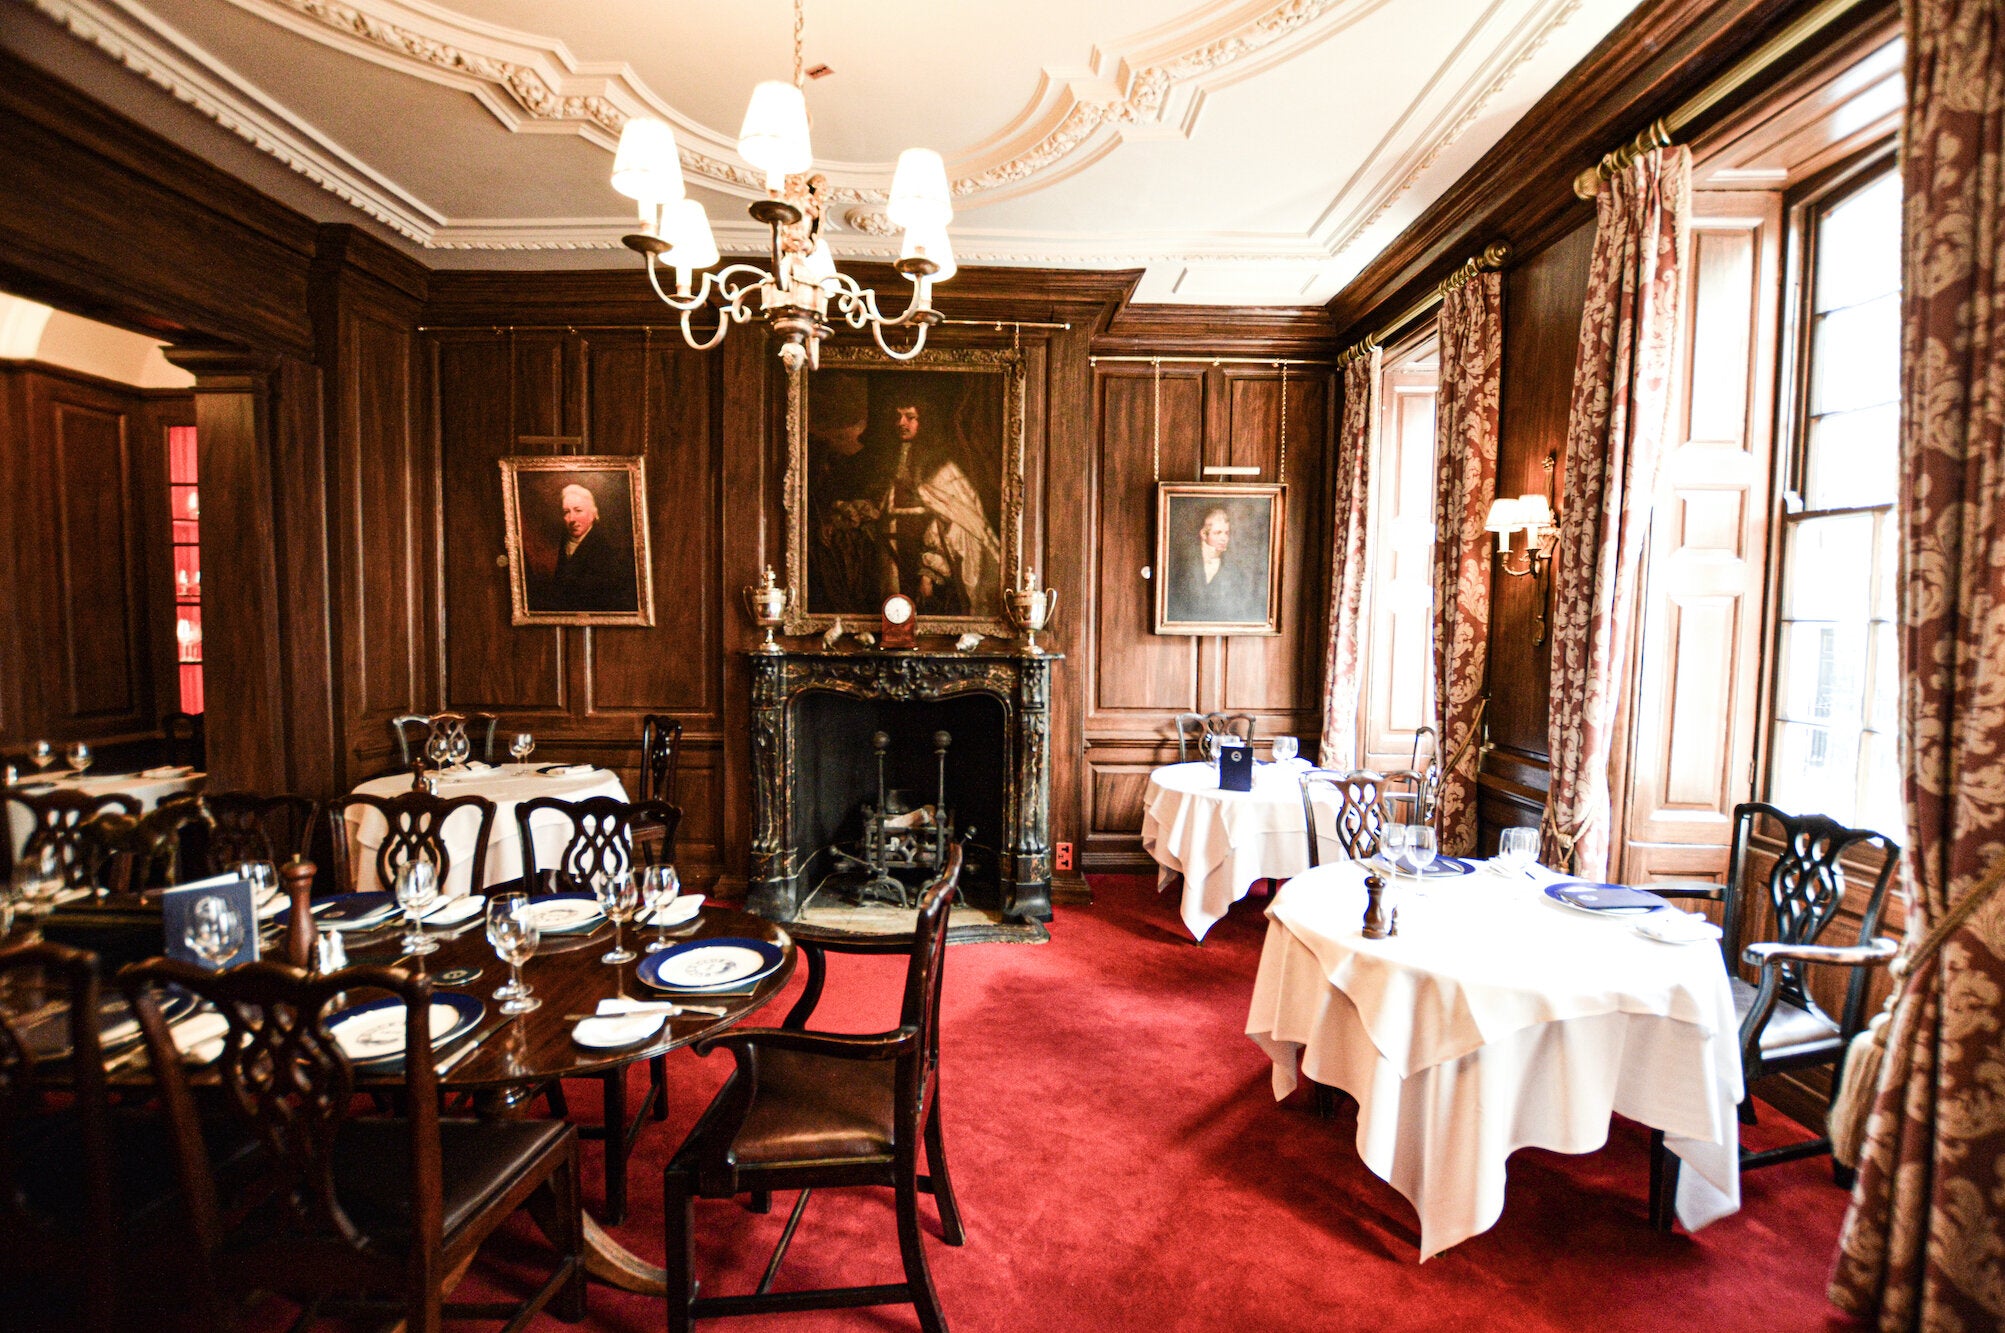 The dining room at Buck's club